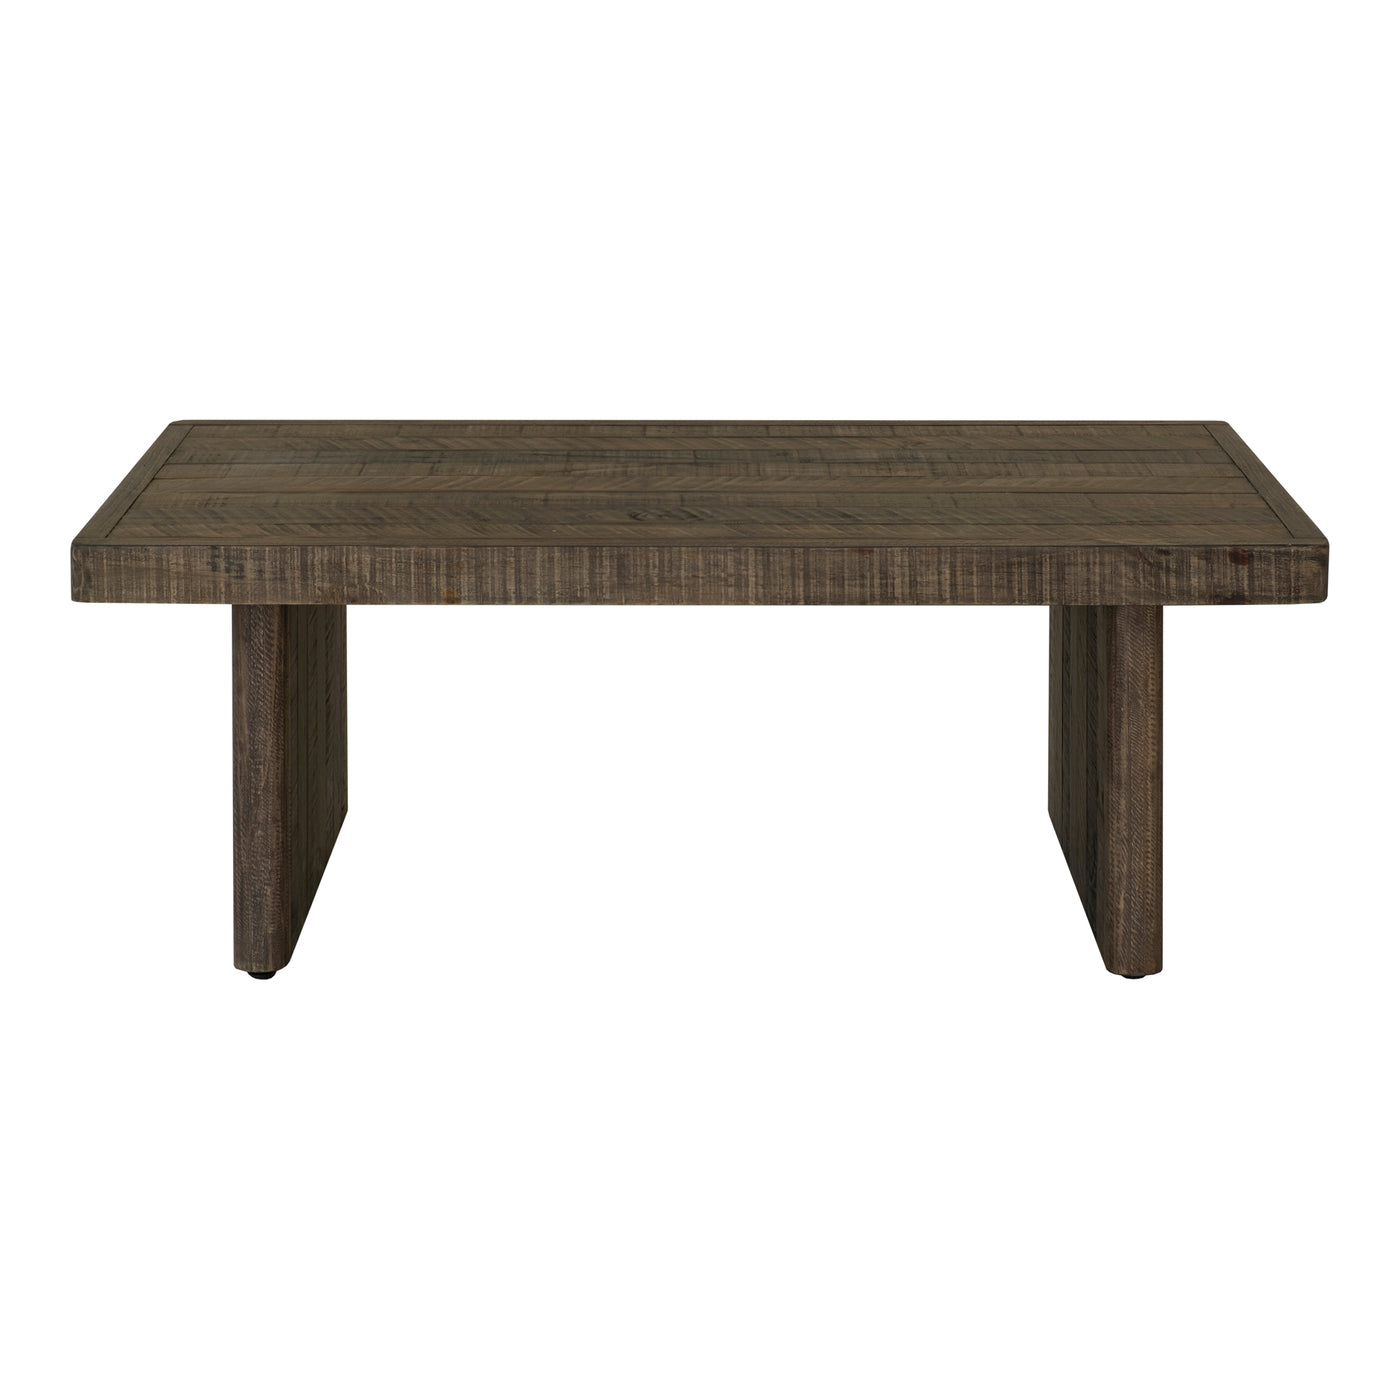 With a nod to the natural, bring earthy, on-trend rustic style to your living space with the Monterey coffee table. Just t...